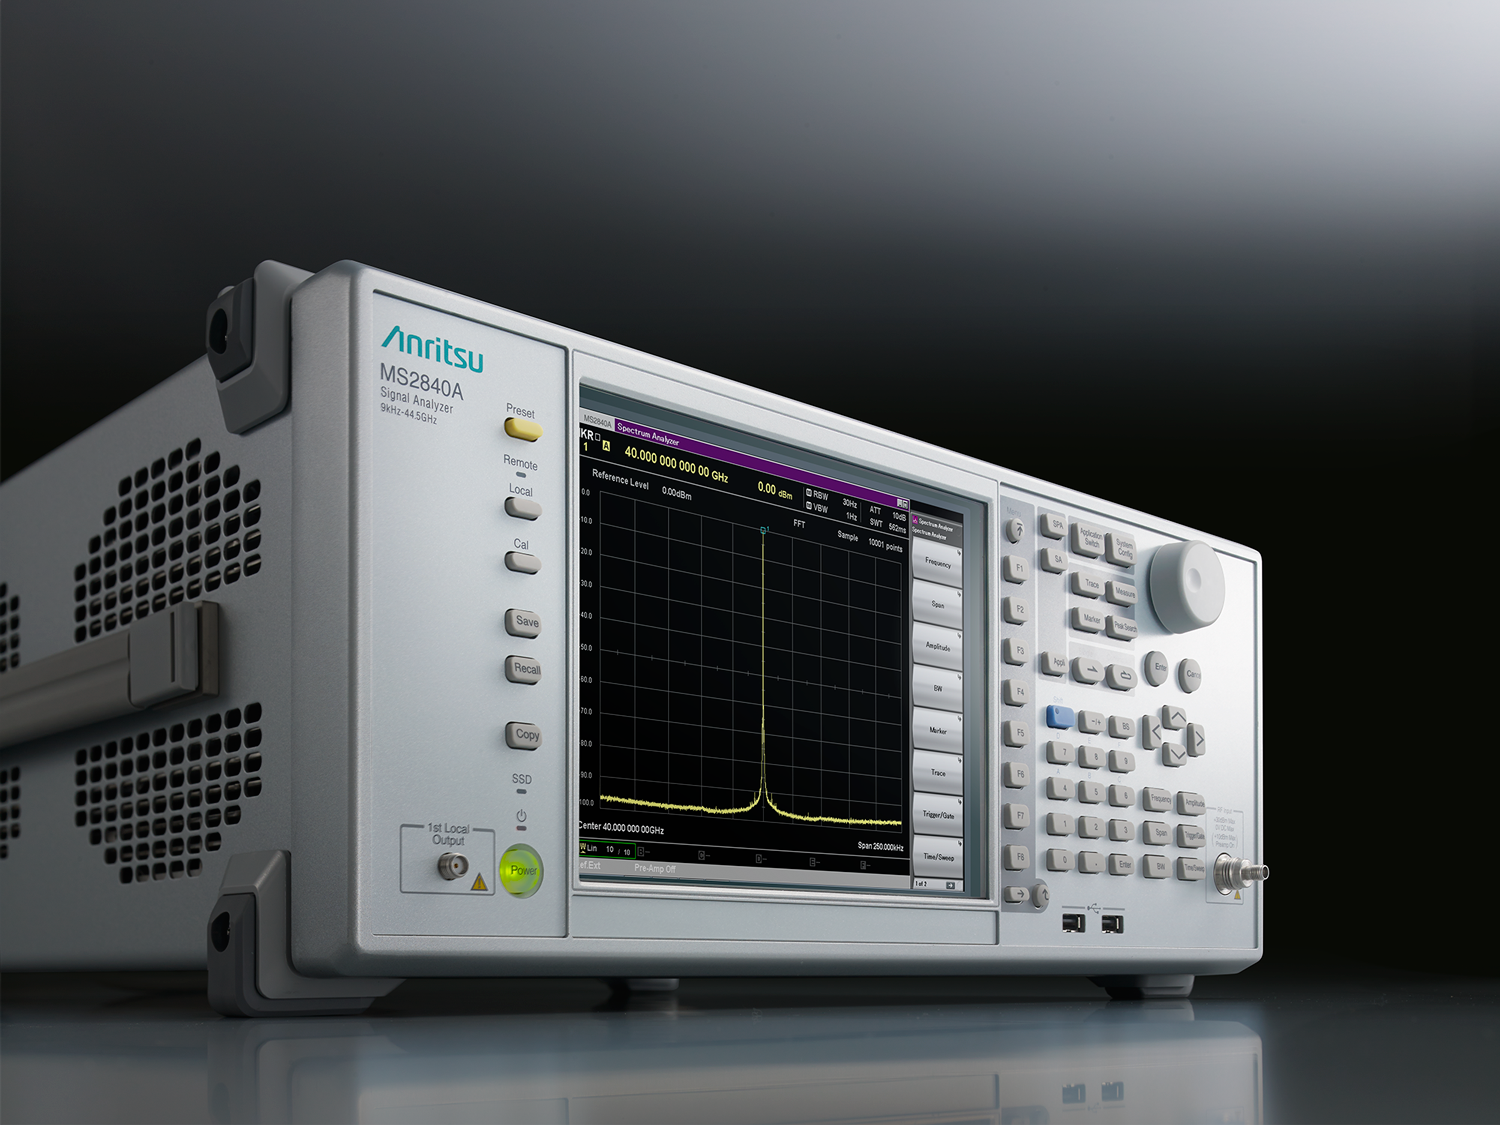 Powered electronic. Анализатор спектра Anritsu ms2721b. Анализатор спектра Anritsu ms2839a. Анализатор спектра радиочастот Anritsu ms2830a. Анализатор спектра Anritsu ms2760a-0070.